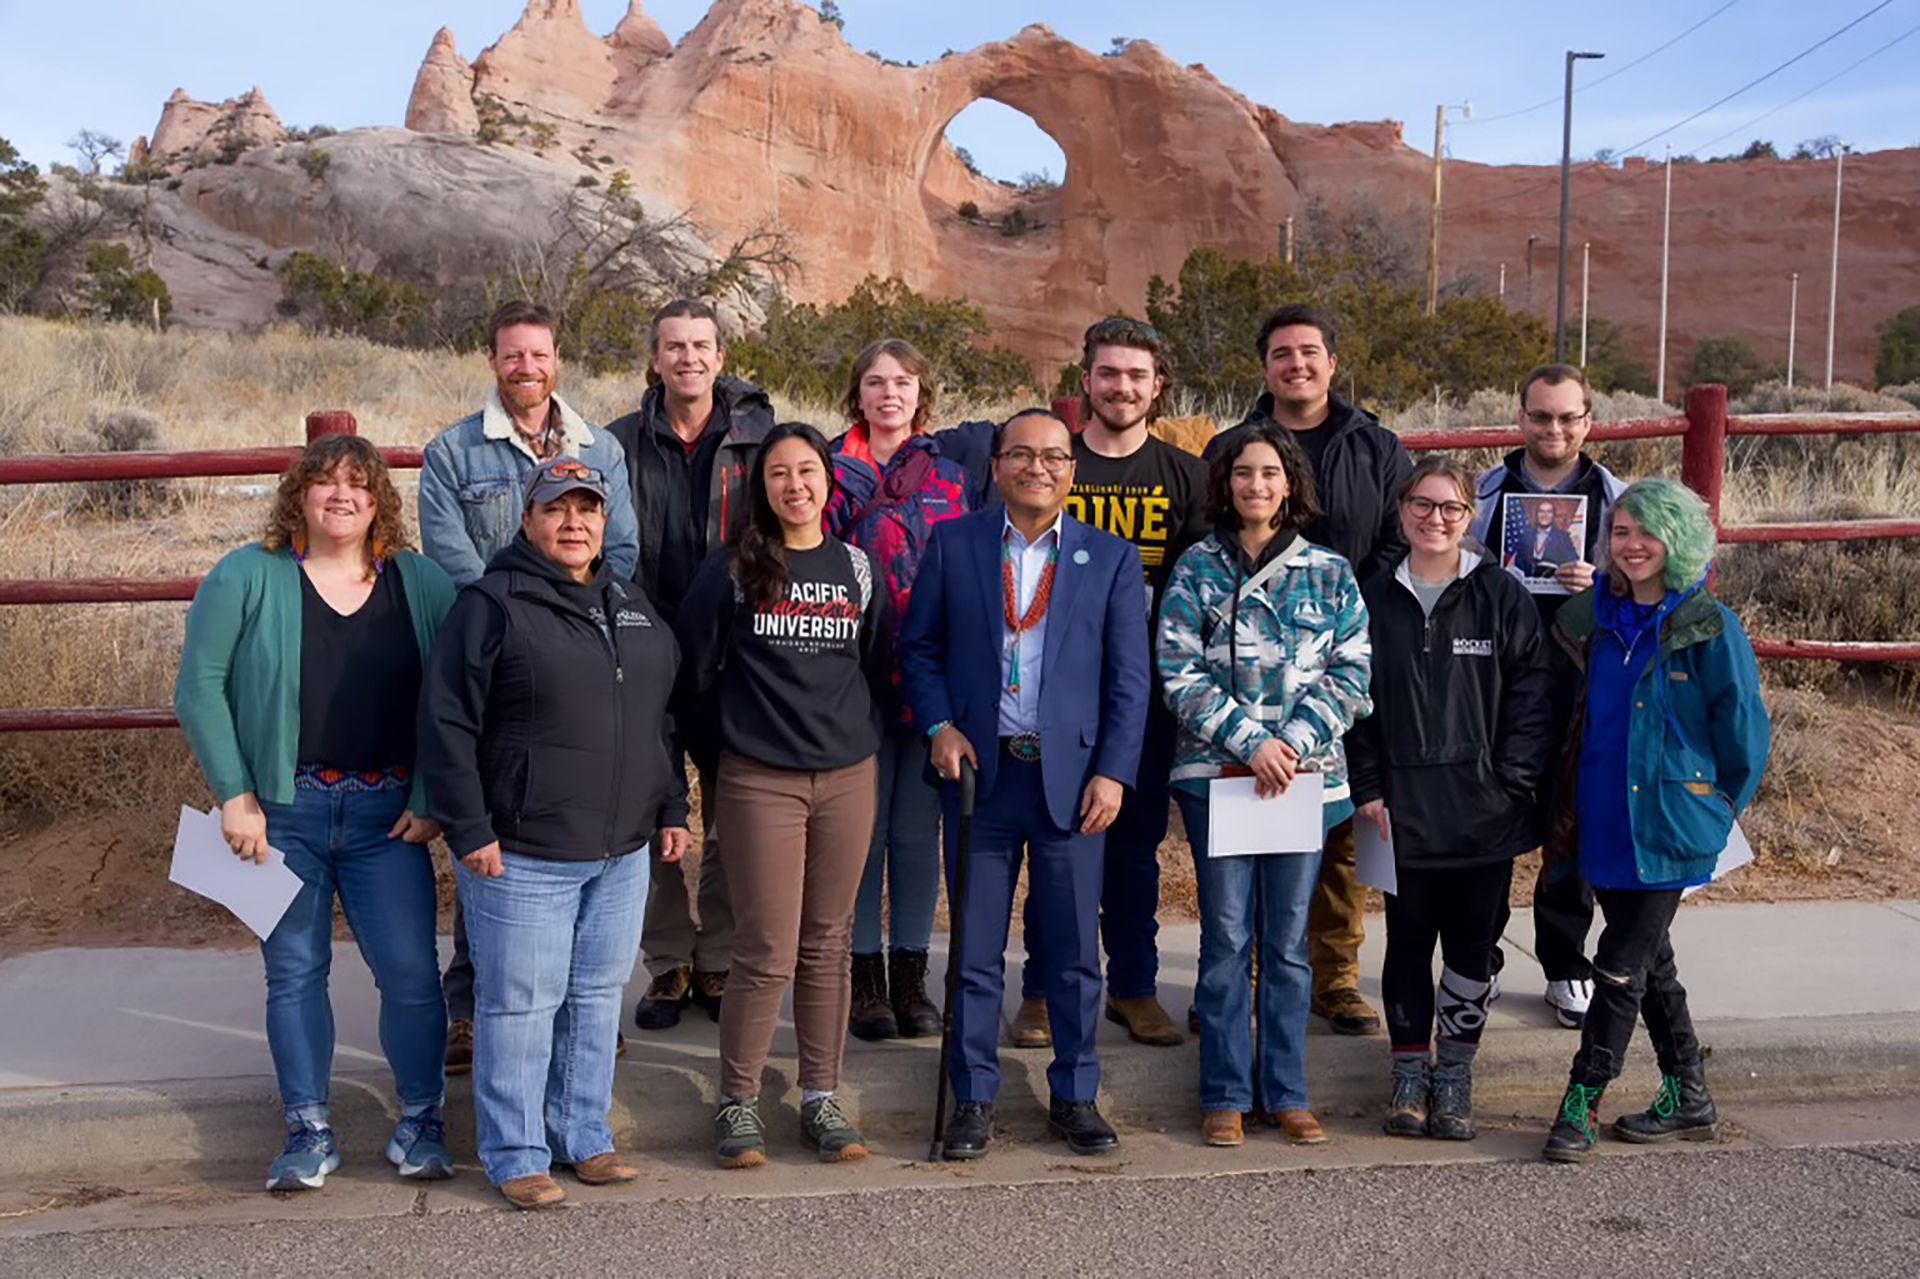 Navajo Nation President Dr. Buu Nygren and Lukachukai Chapter Vice President Connette Blair met with students in Window Rock, where Dr. Nygren talked about his background and policy goals.